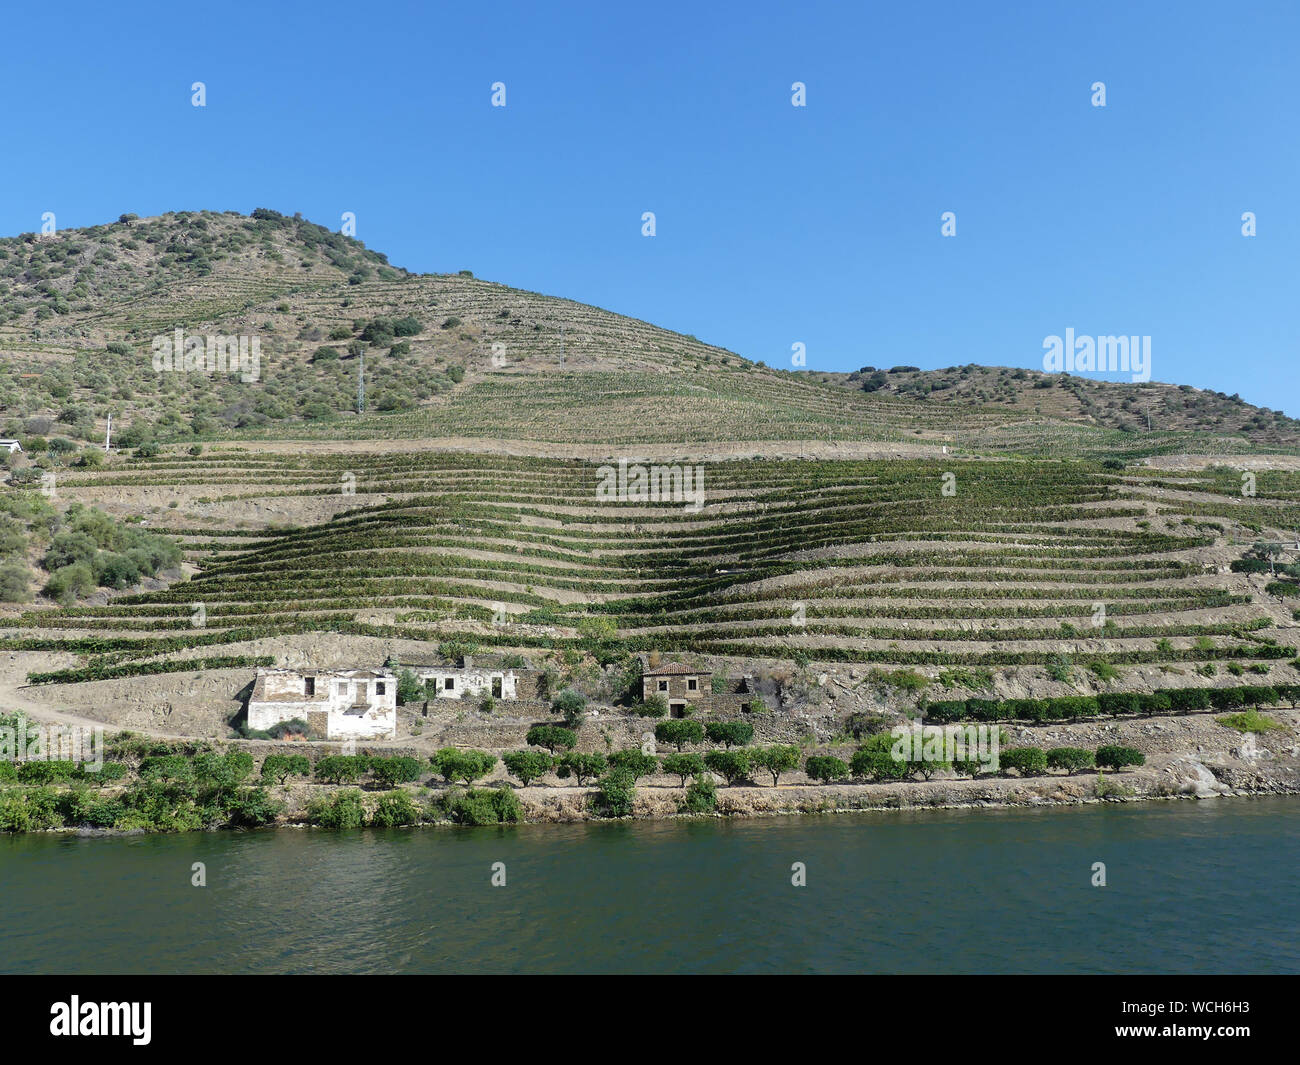 VINYARDS in the Douro River valley, Portugal,  with Almond trees on the lower slopes. . Photo: Tony Gale Stock Photo